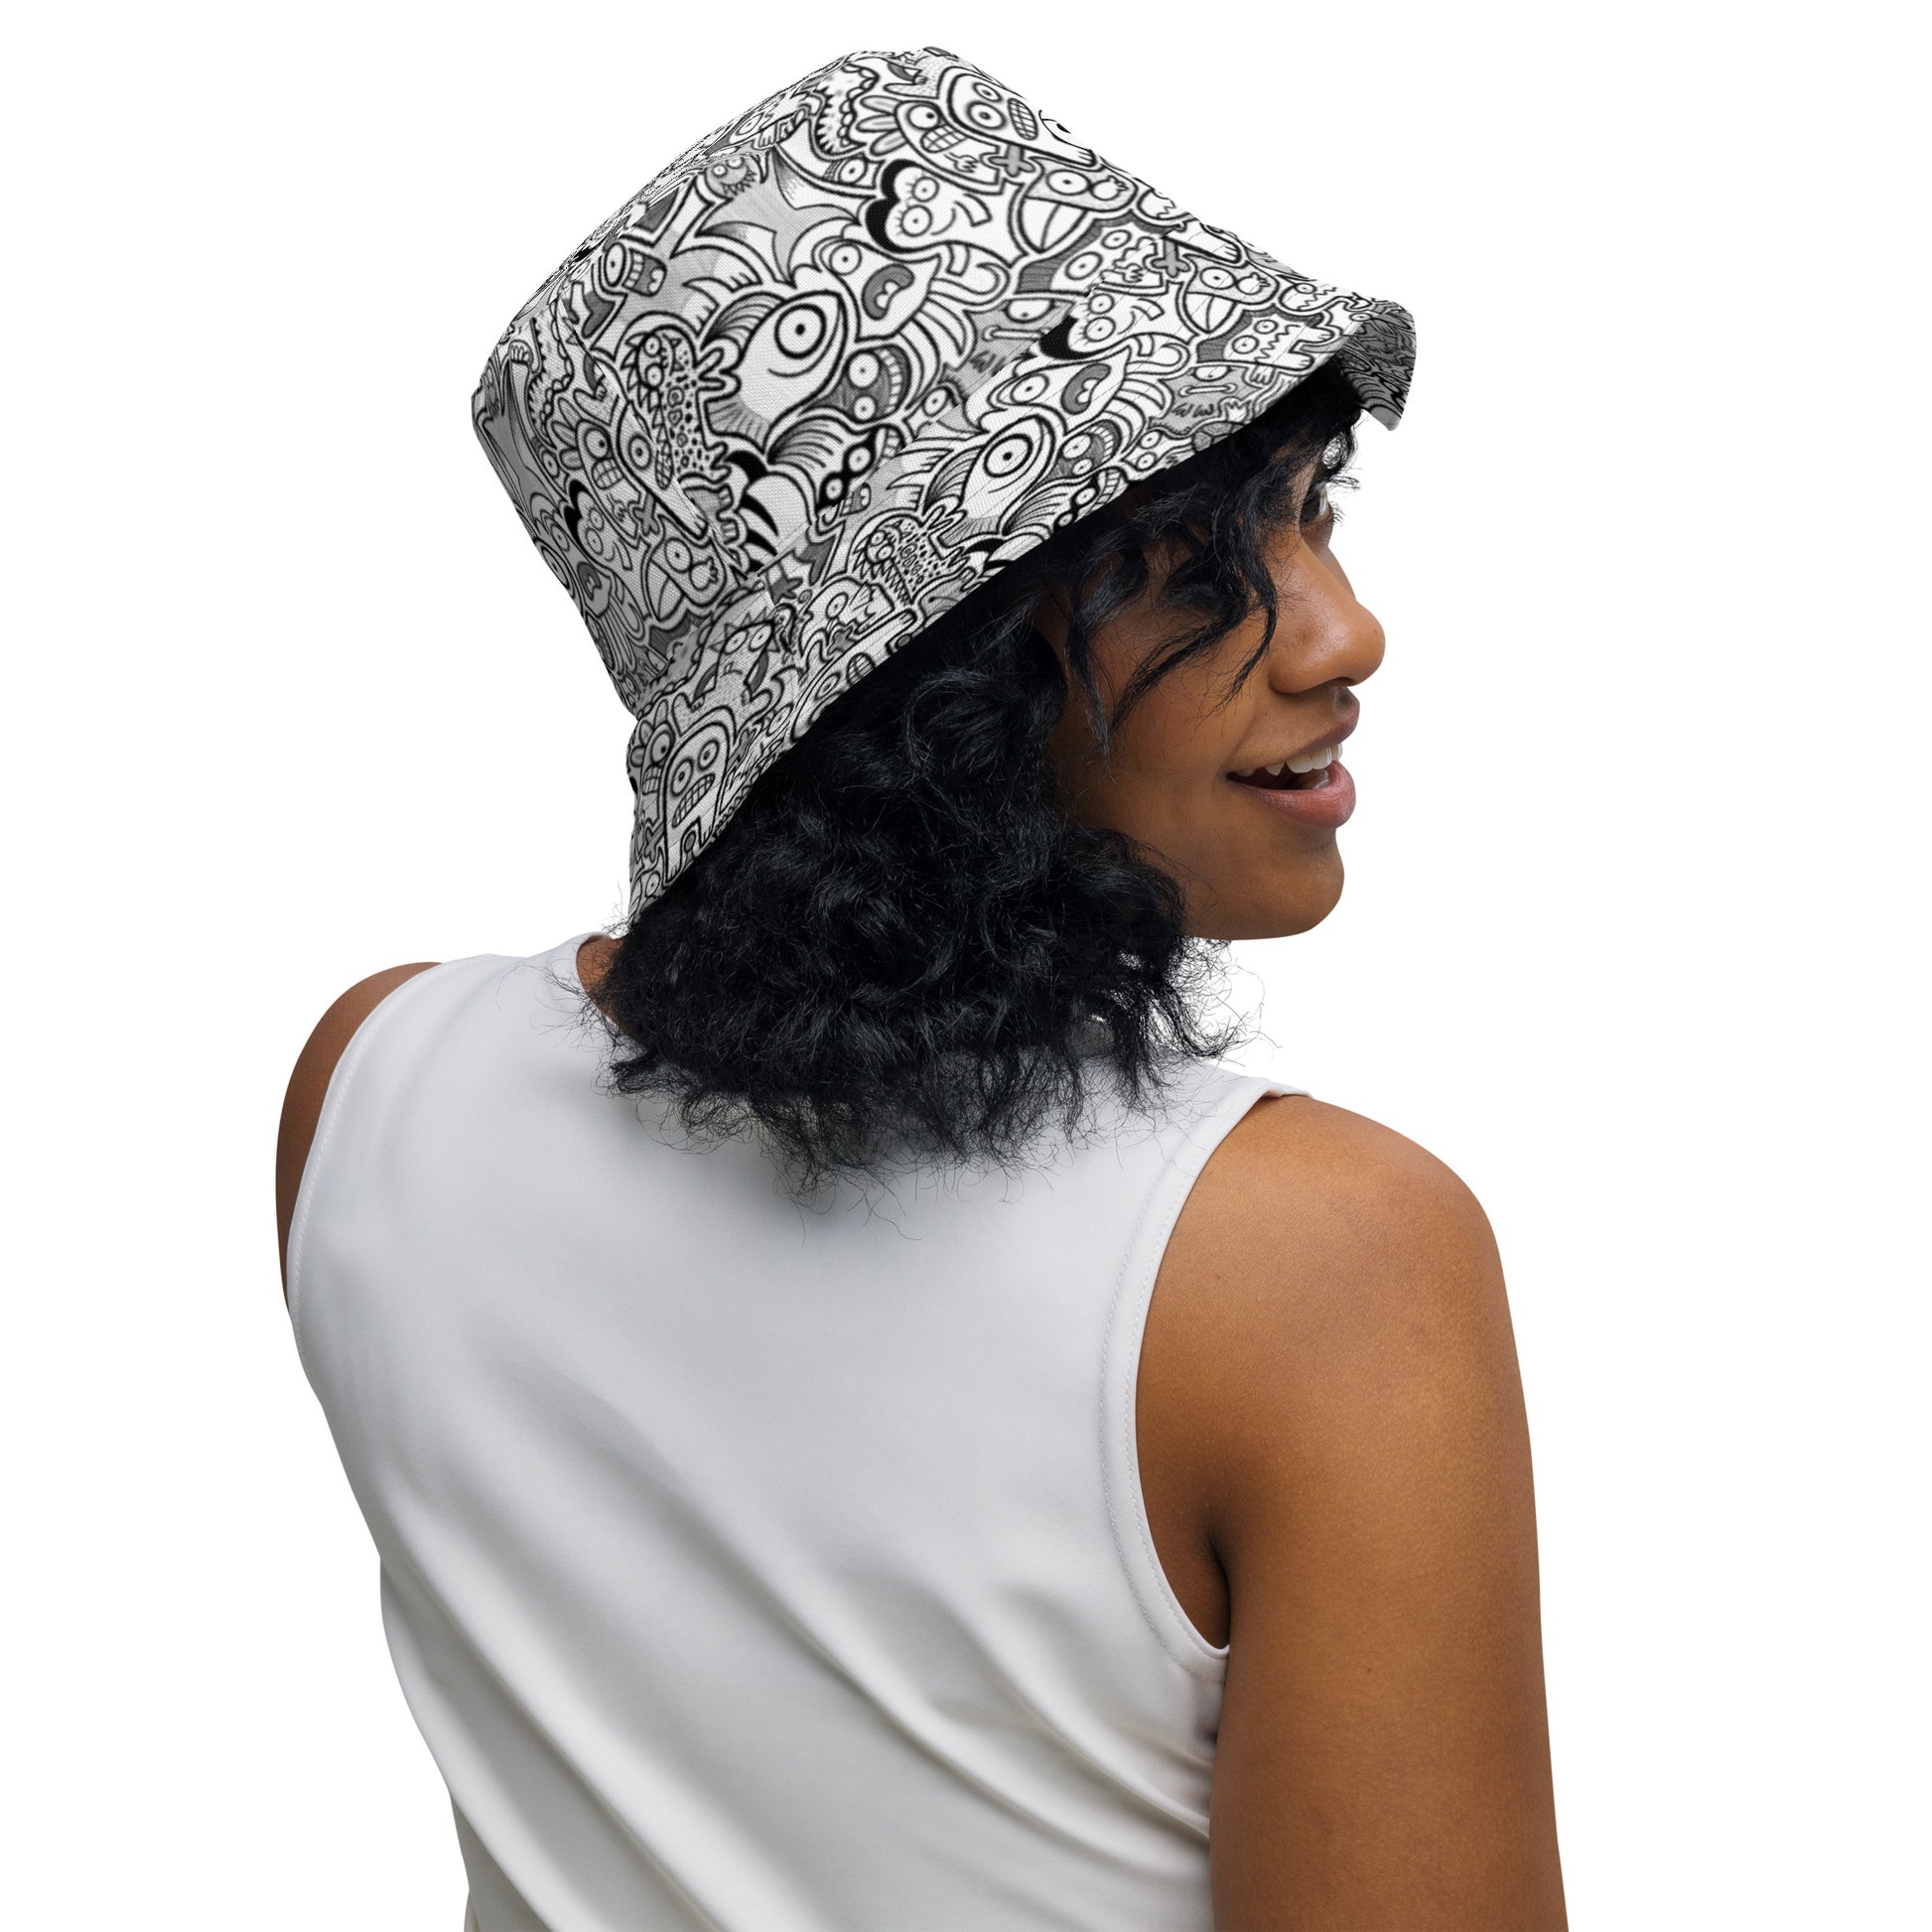 Fill your world with cool doodles Reversible bucket hat. Woman wearing Zoo&co’s bucket hat